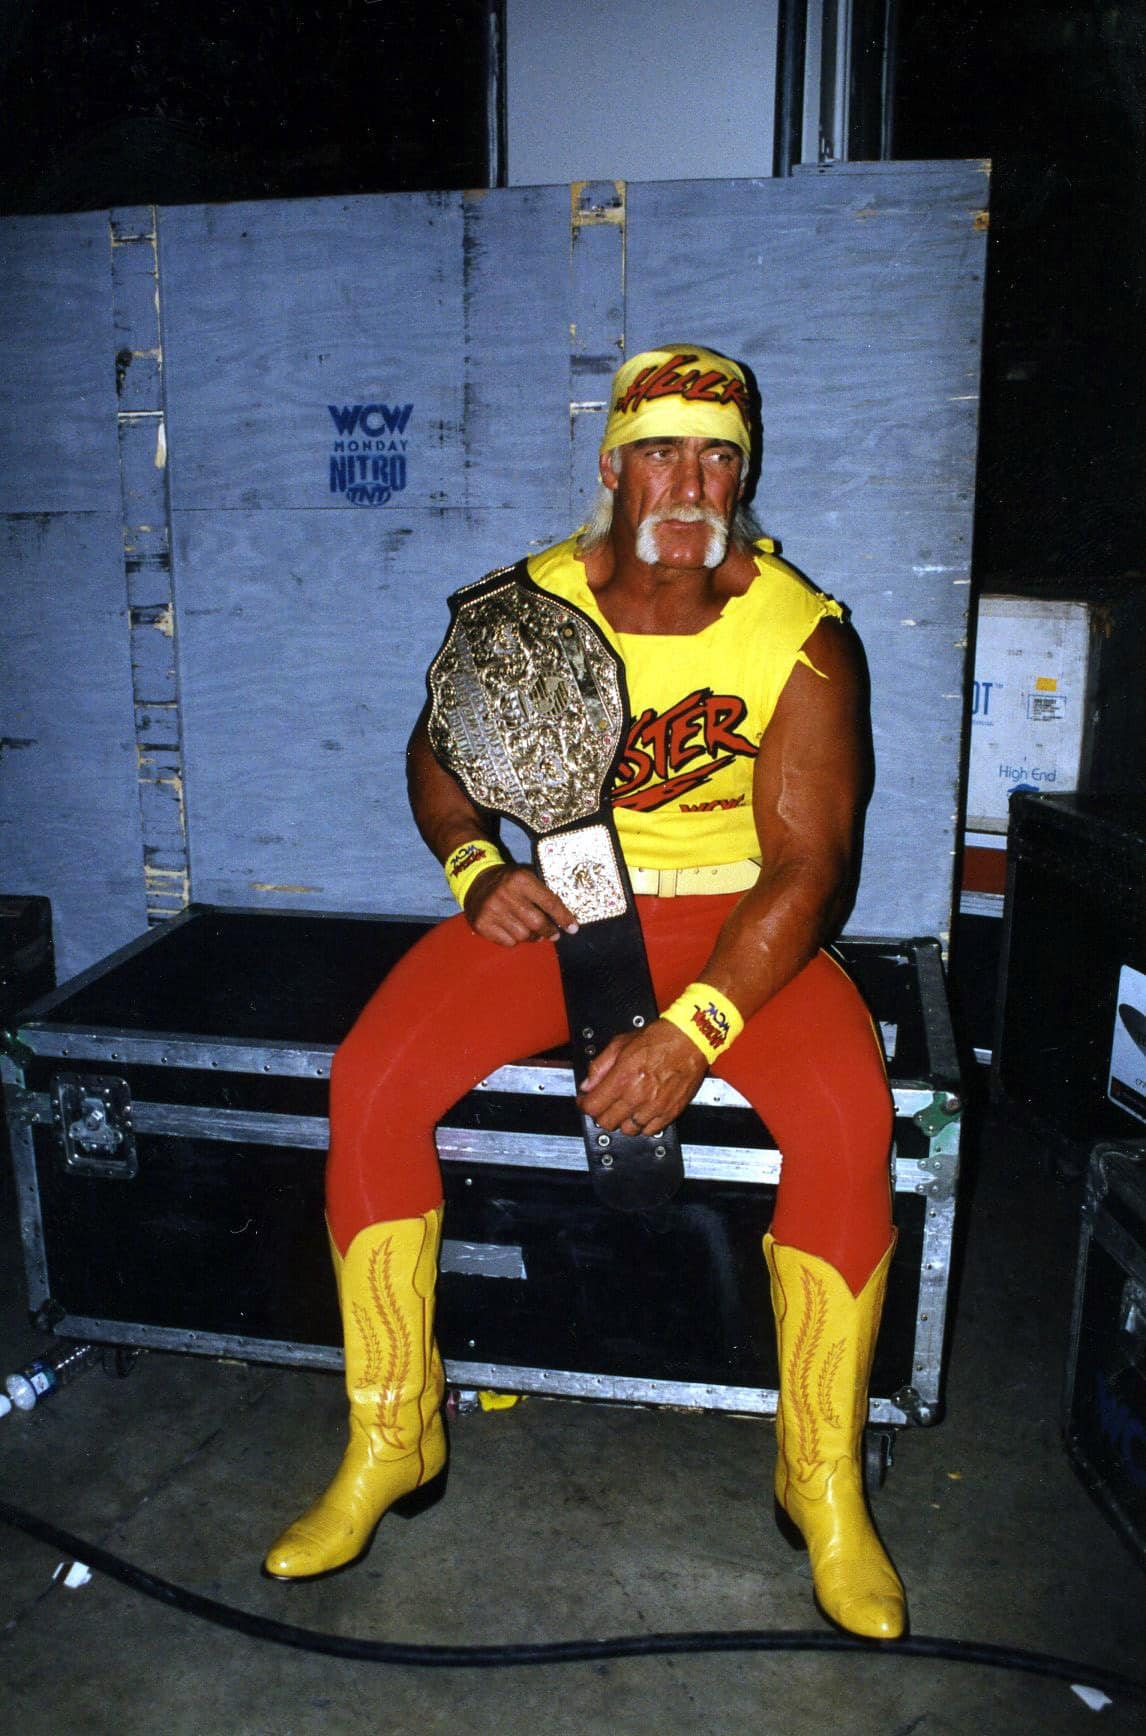 That was the day that changed my life - Hulk Hogan reveals the greatest moment of his career